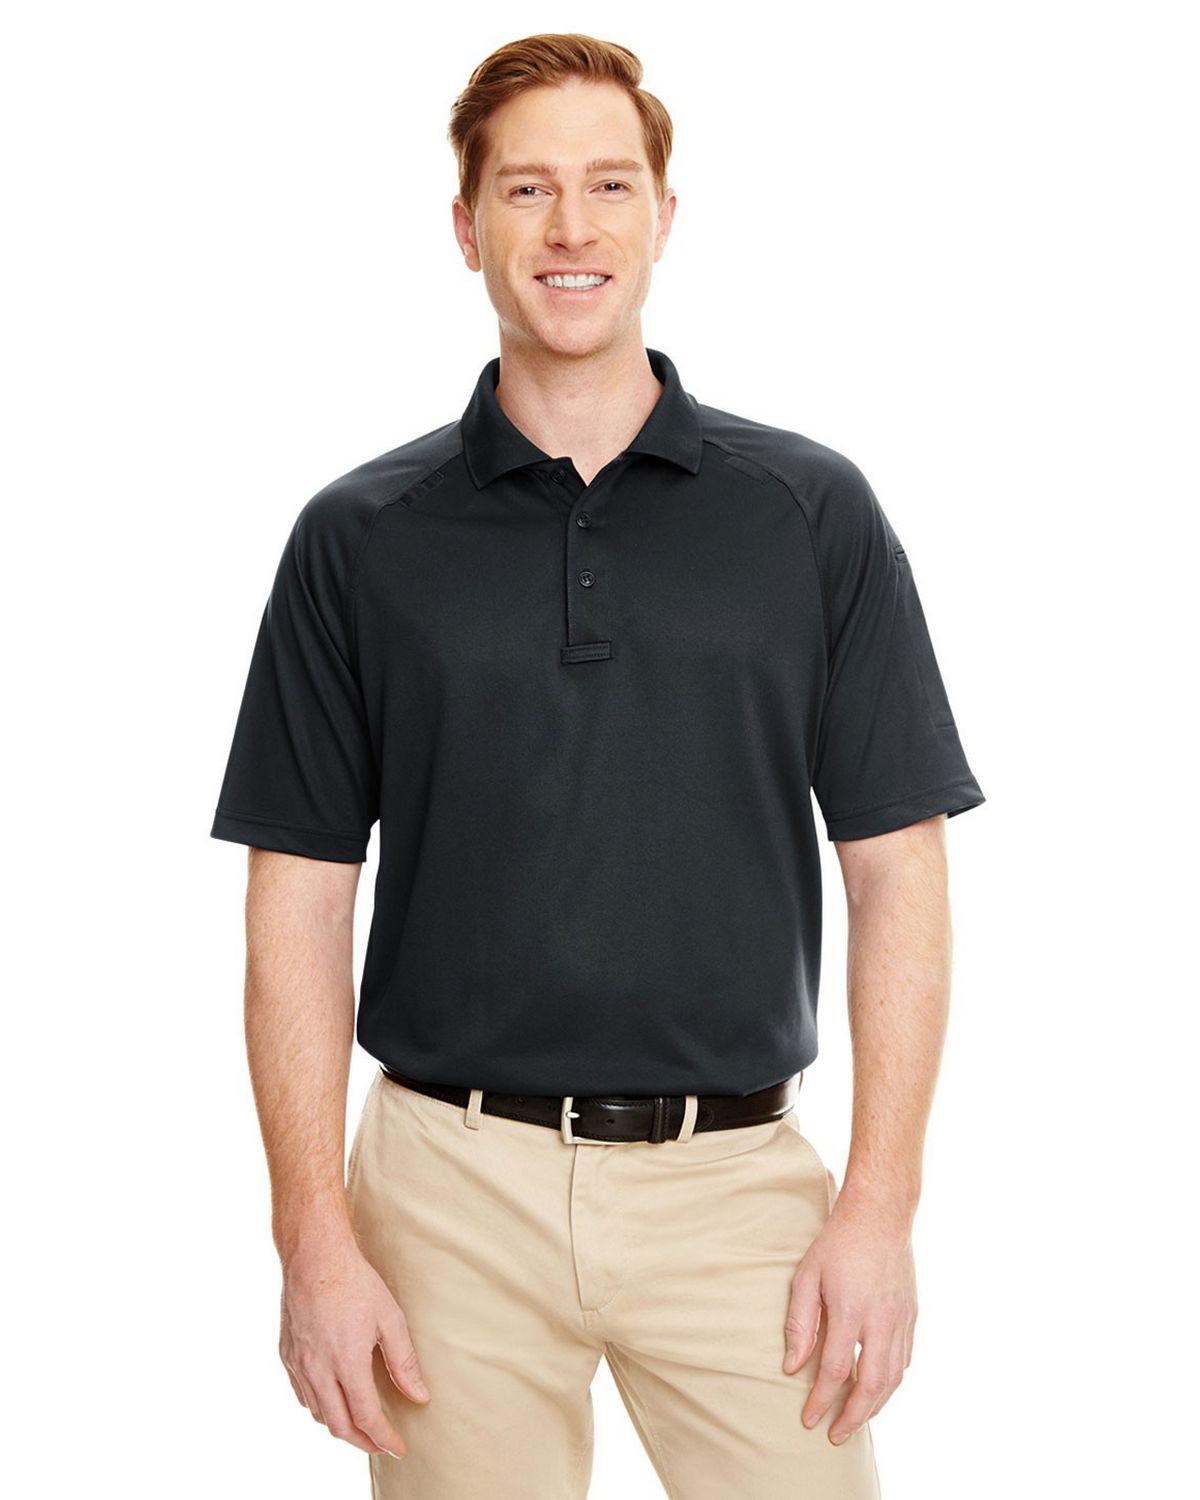 Size Chart for Harriton M211 Tactical Performance Polo Shirt